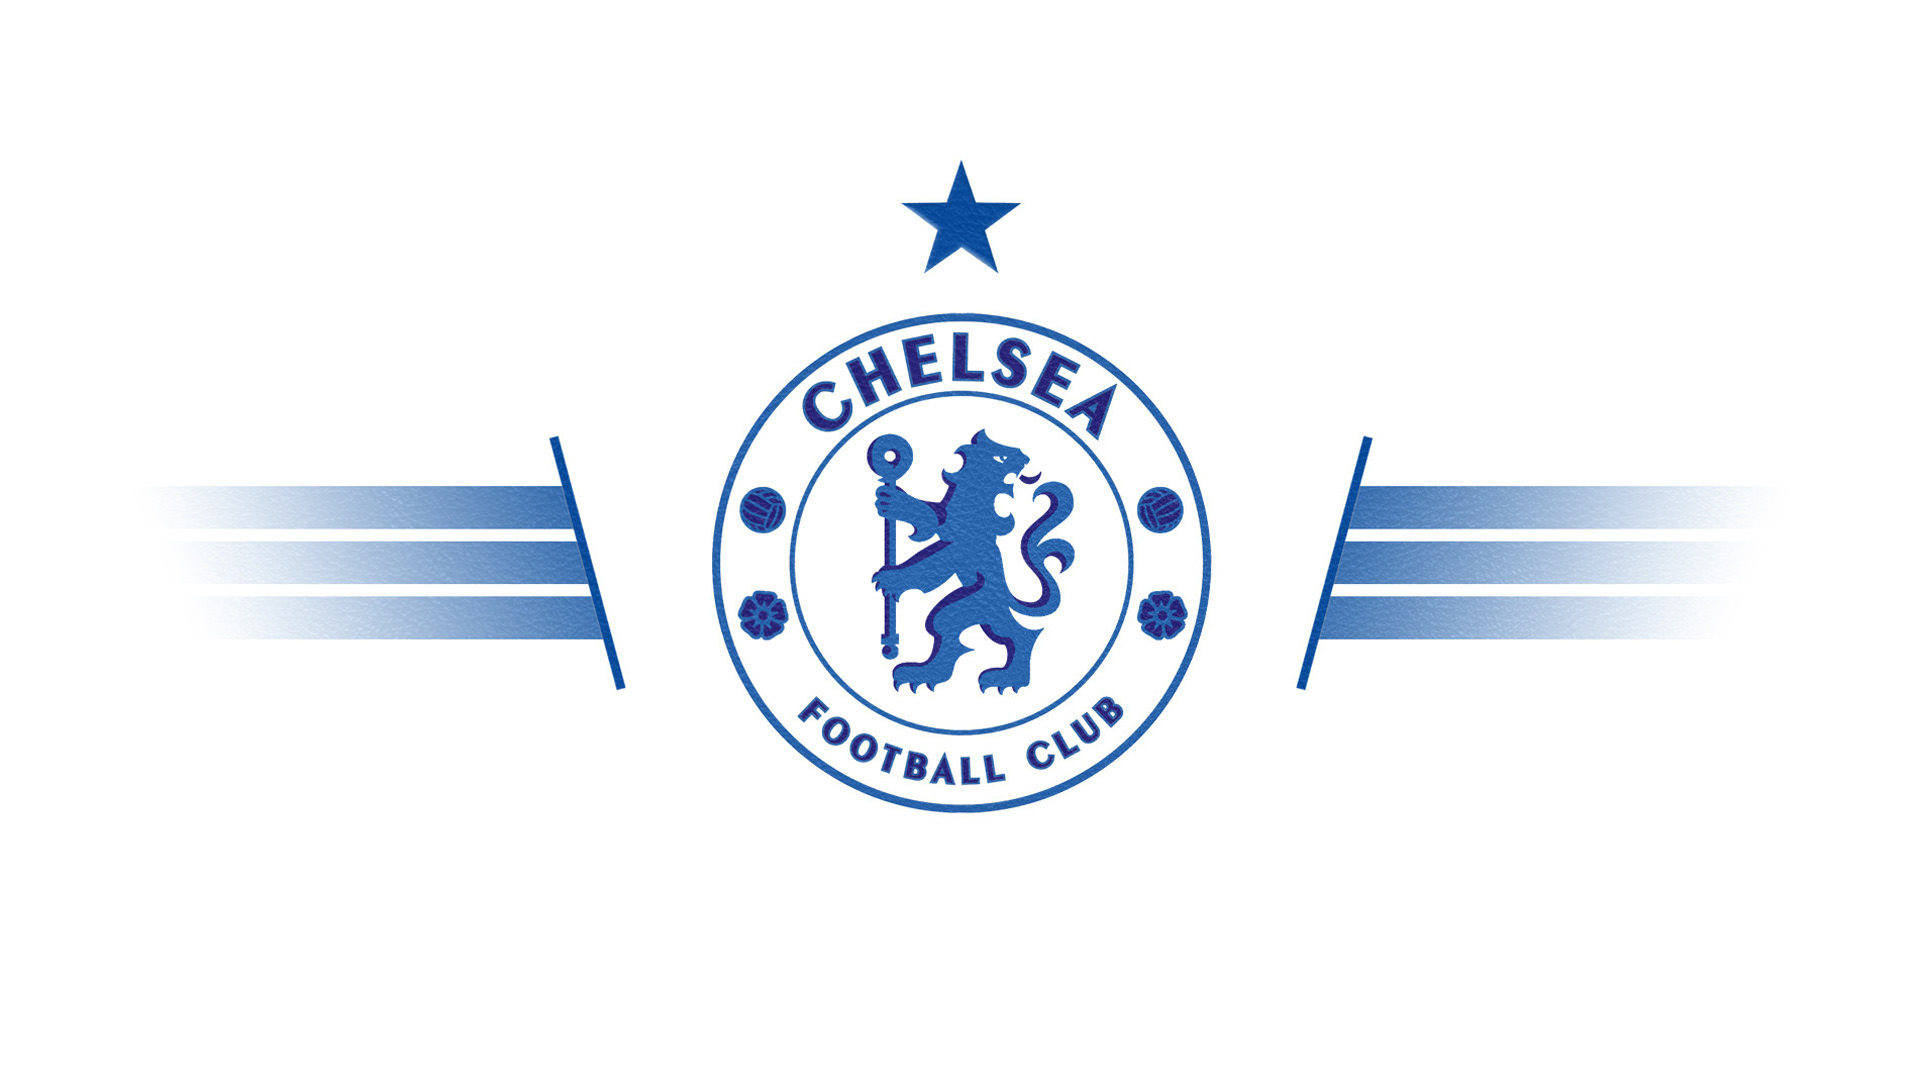 Chelsea: The Blues, Transformed into a European heavyweight following a takeover by Roman Abramovich in 2003. 1920x1080 Full HD Wallpaper.